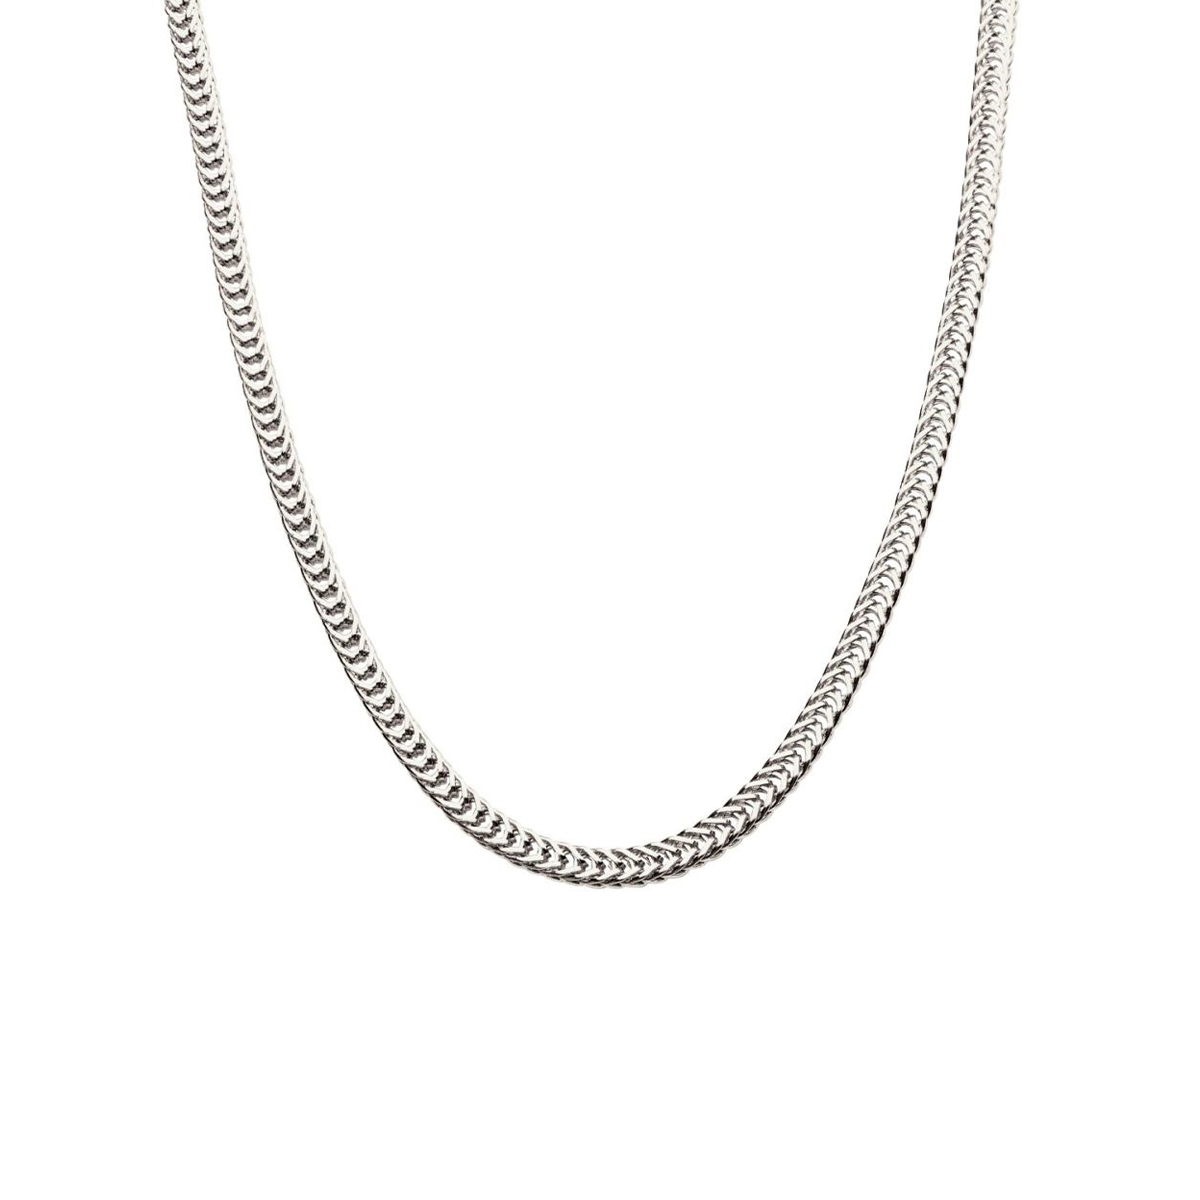 Stainless Steel 22-inch Foxtail Chain